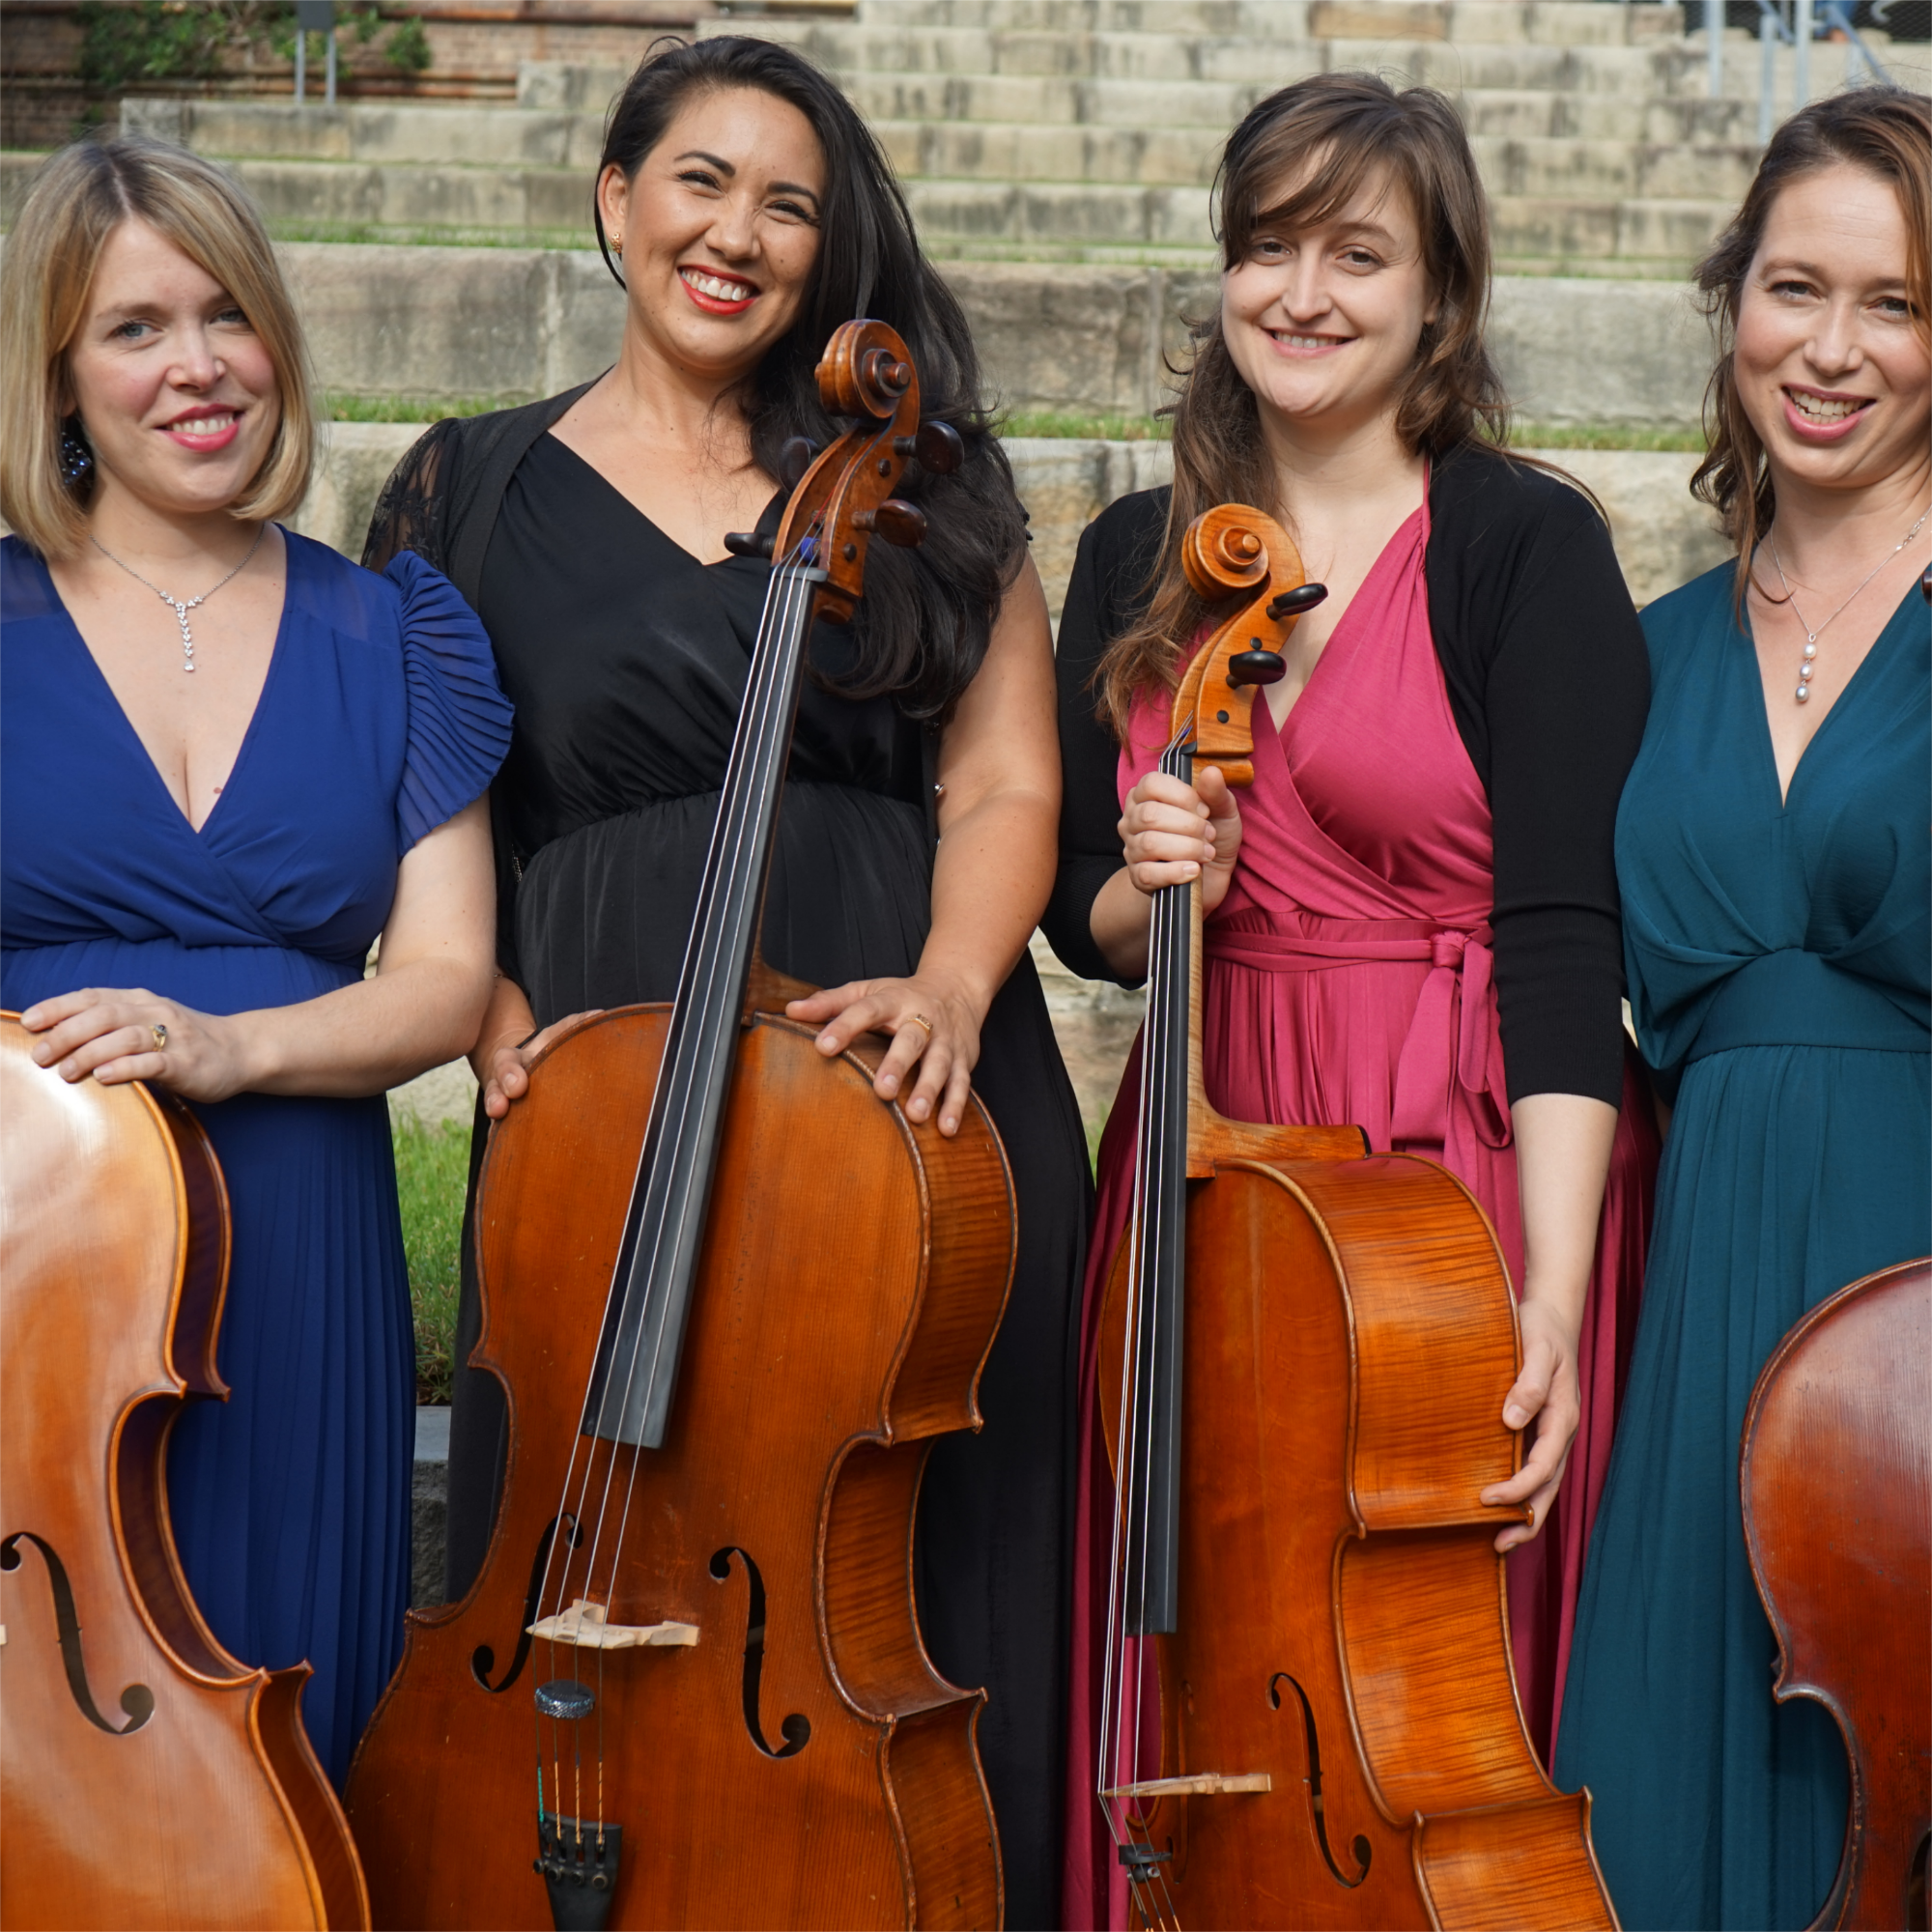 A photo of four people with their cellos, the members of the Sydney Cello Quartet.